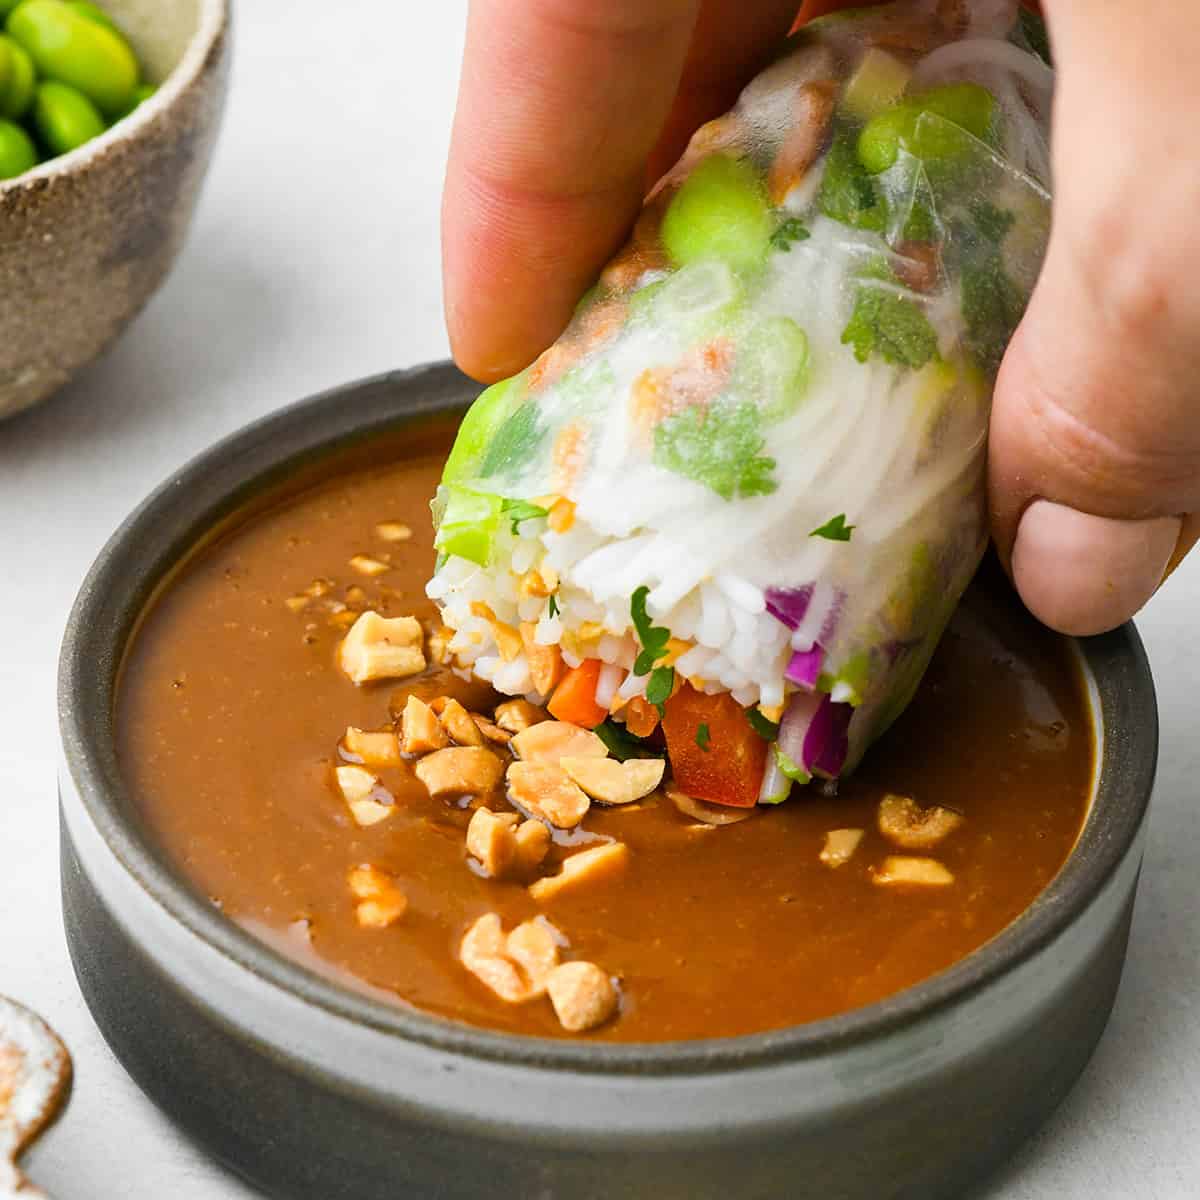 a Spring Roll being dipped into peanut sauce